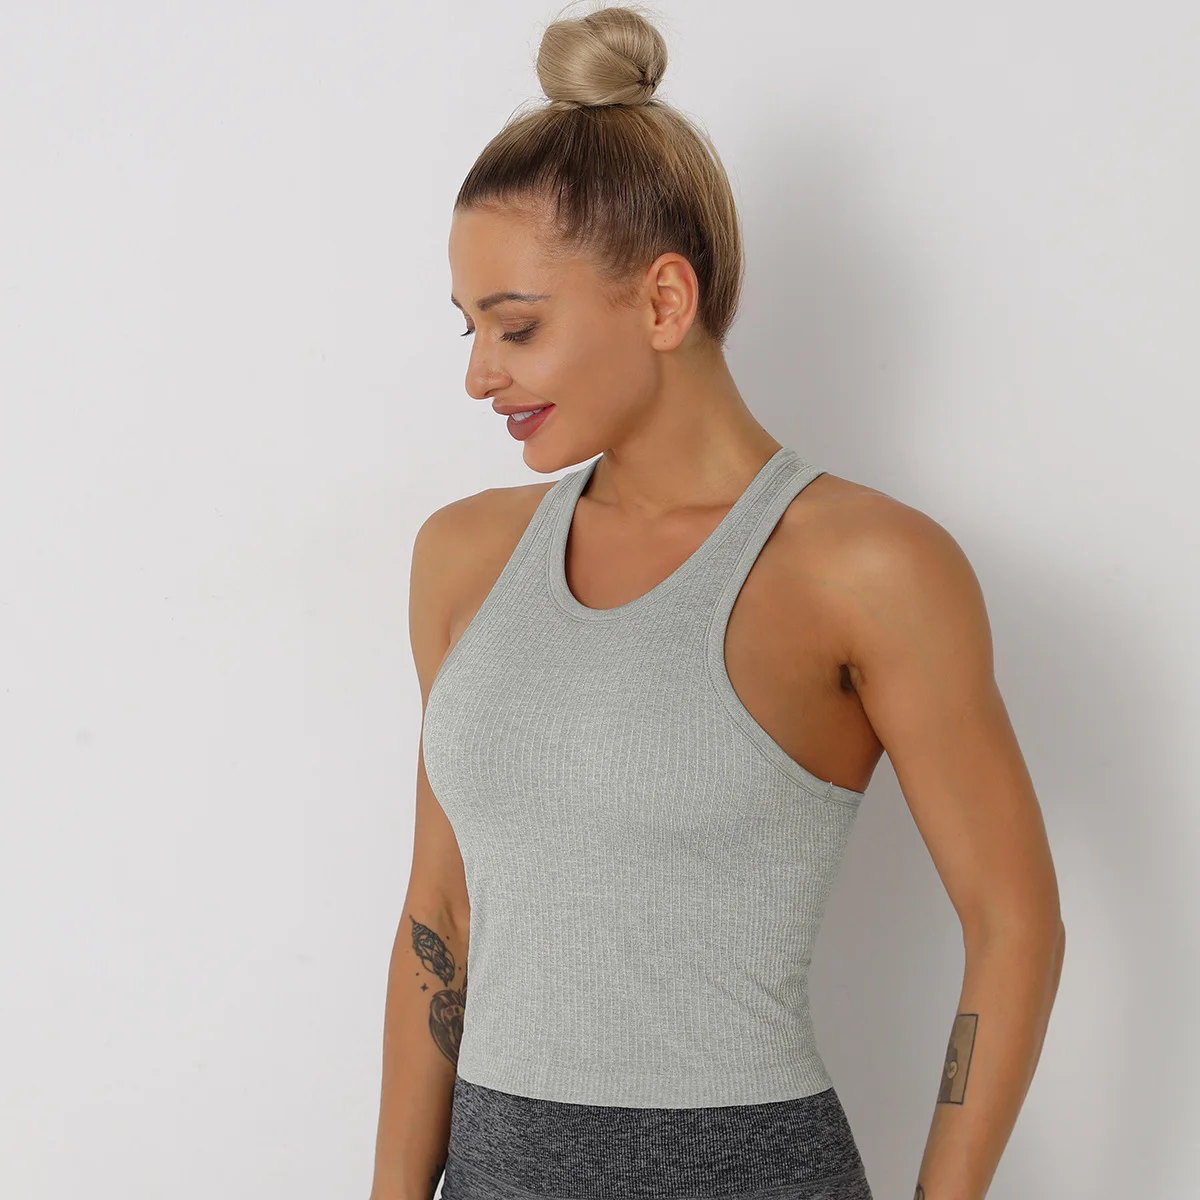 2022 Hot Sale Fashion Casual Yoga Workout Gym Sports Bra Long Camisole For Women Fitness Short Tank Tops